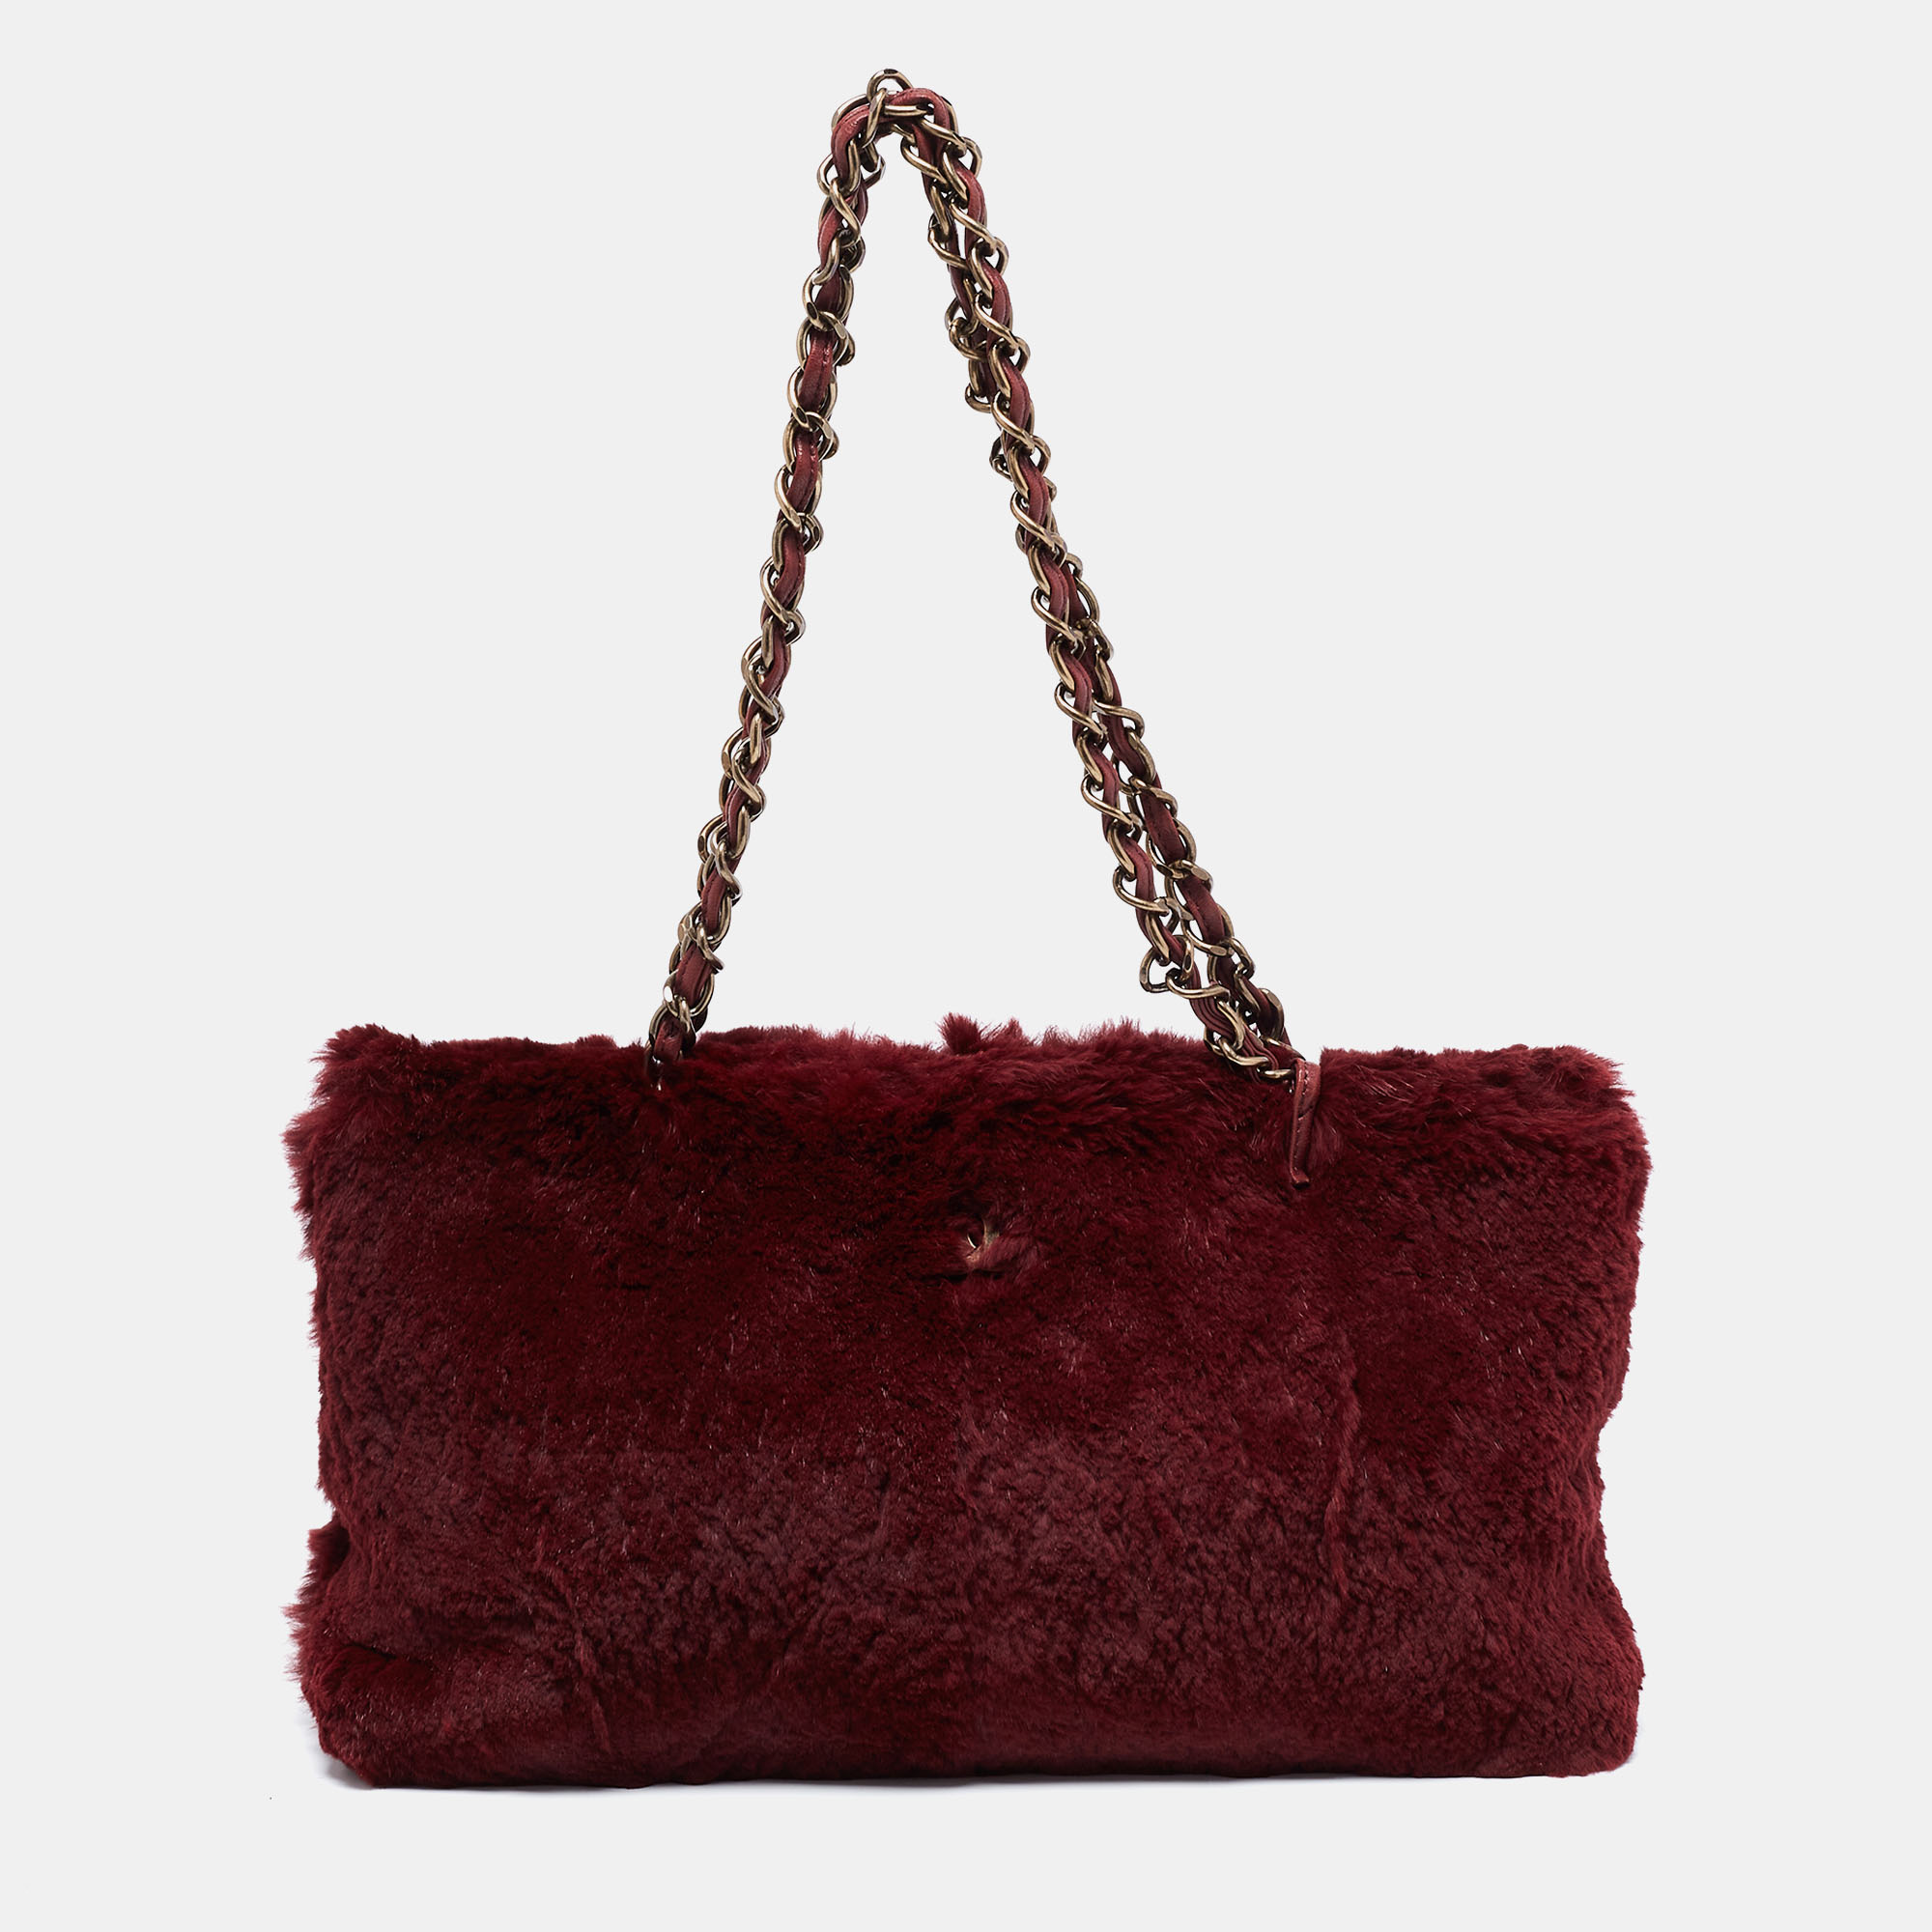 Add a winning touch to your attire with this stylish Chanel shoulder bag. It carries the same elegance and beauty as the labels other iconic bags; however its eccentricity lies in its unique construction. Crafted from burgundy colored fur it features a smooth exterior. Its interwoven shoulders straps allow you to tote the bag on your shoulders. The bag opens to a leather interior with enough space for your essentials and a zip pocket. This is the perfect accessory to complement your statement looks.